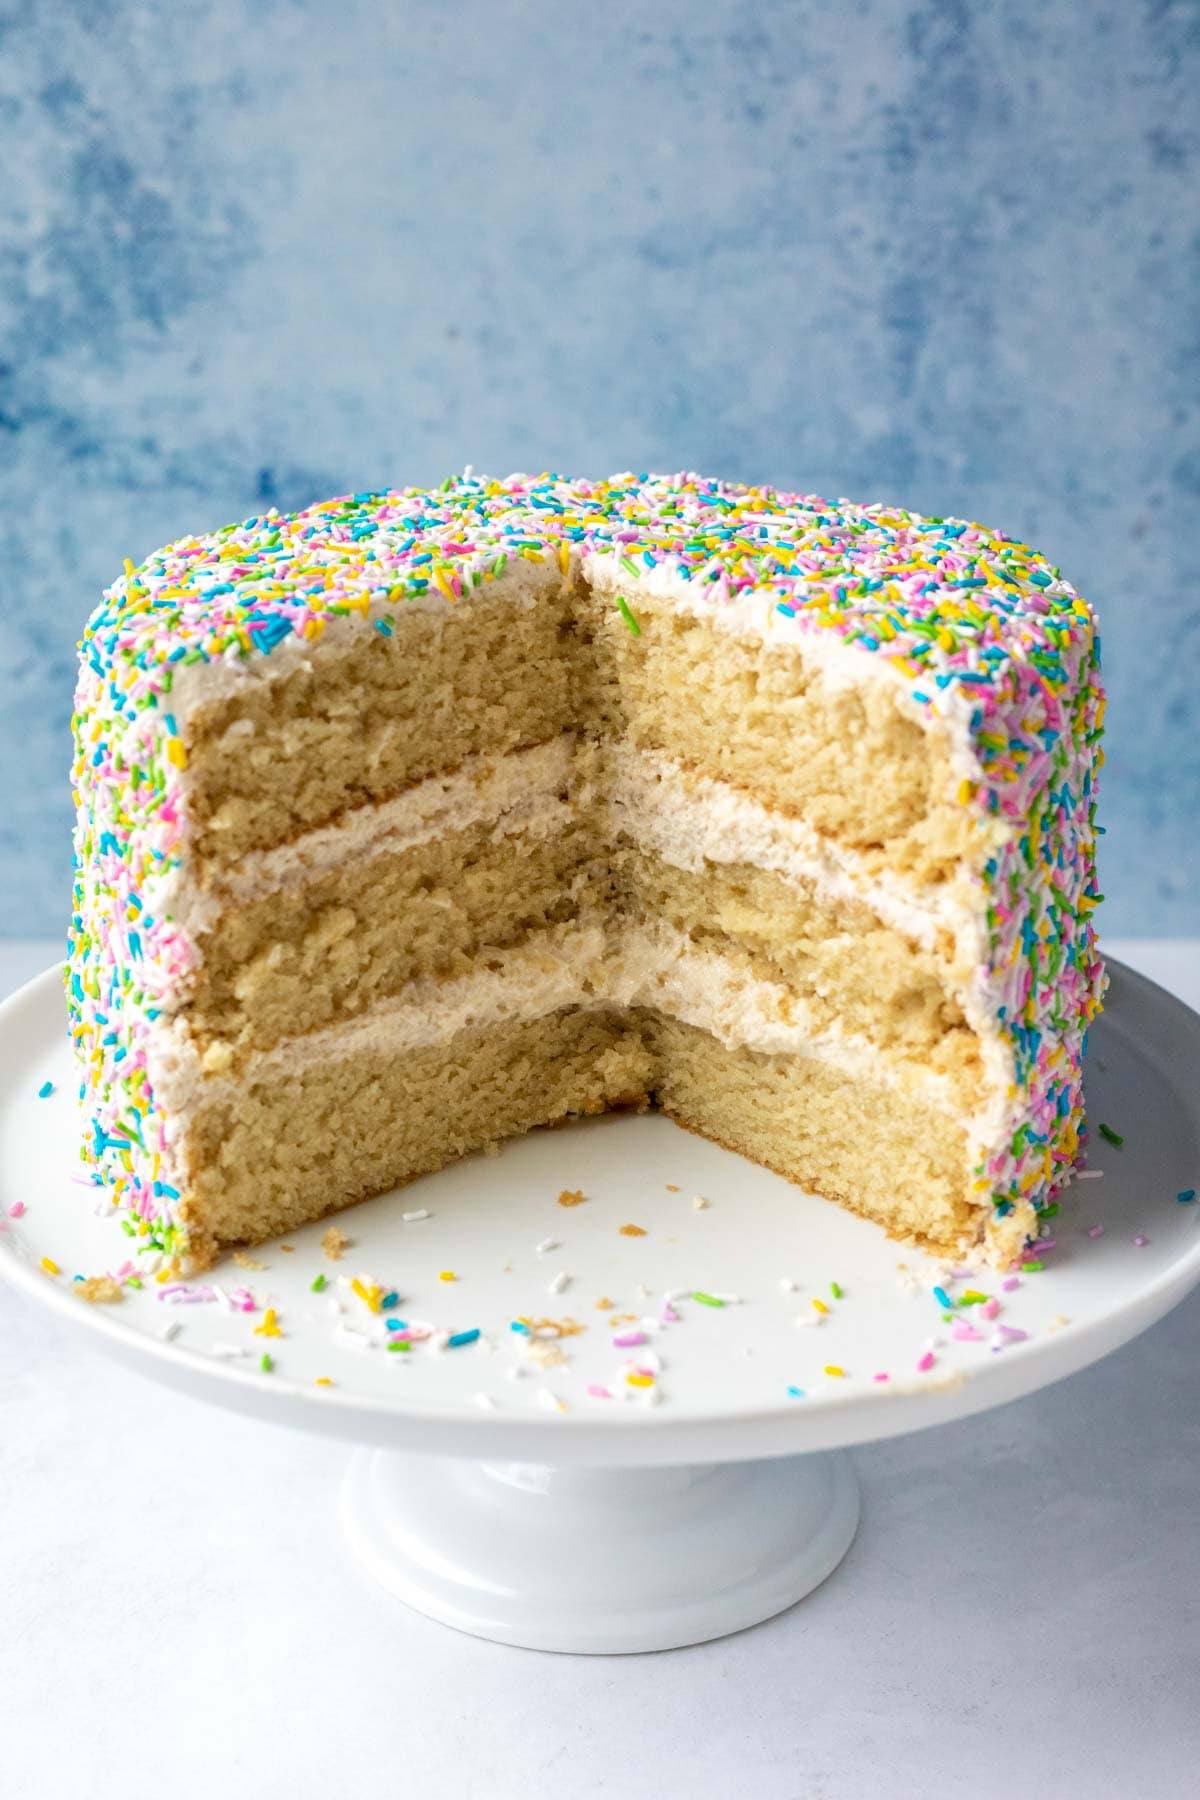 Slices removed from vegan layer cake showing the fluffy vanilla cake and frosting inside.